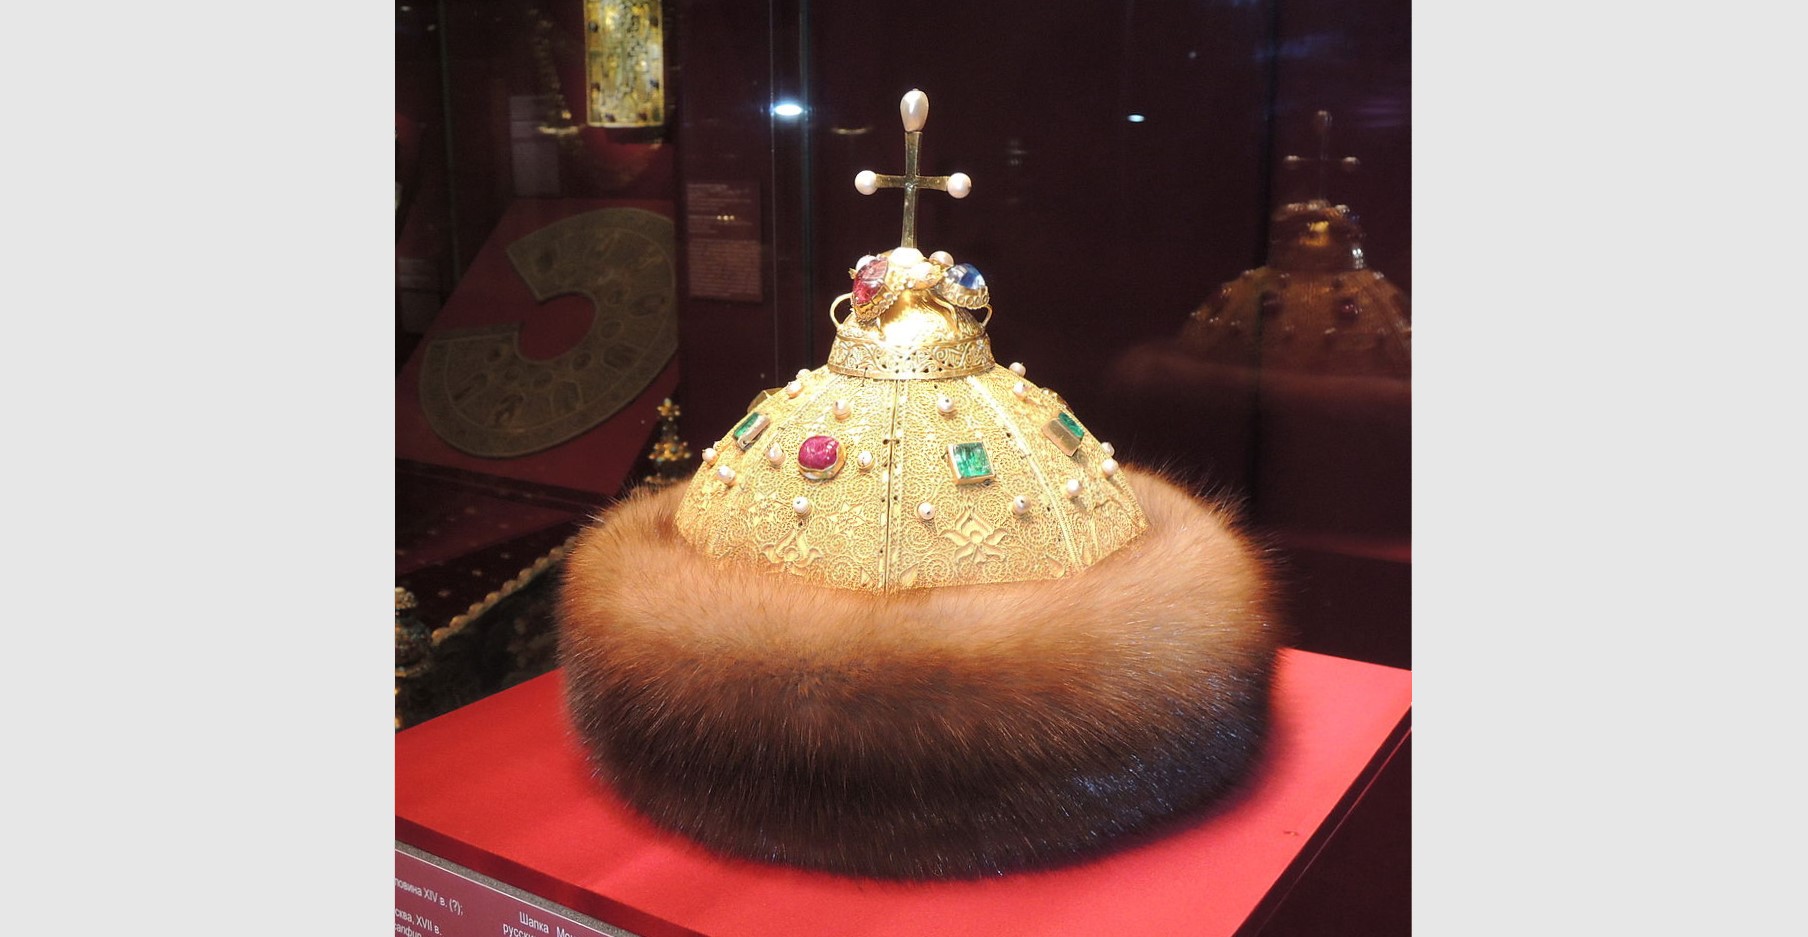 Monomakh's Cap is a chief relic of the Muscovy Grand Princes and Tsars. It is a symbol-crown of their autocracy, and is the oldest of the crowns currently exhibited at the Kremlin Armoury. Monomakh's Cap is an early 14th-century gold filigree skullcap composed of eight sectors, ornamented with a scrolled gold overlay, inlaid with rubies, emeralds and pearls, and trimmed with sable. The cap is surmounted by a gold cross with pearls at each of the extremities. (Photo: Shakko via Wikipedia)